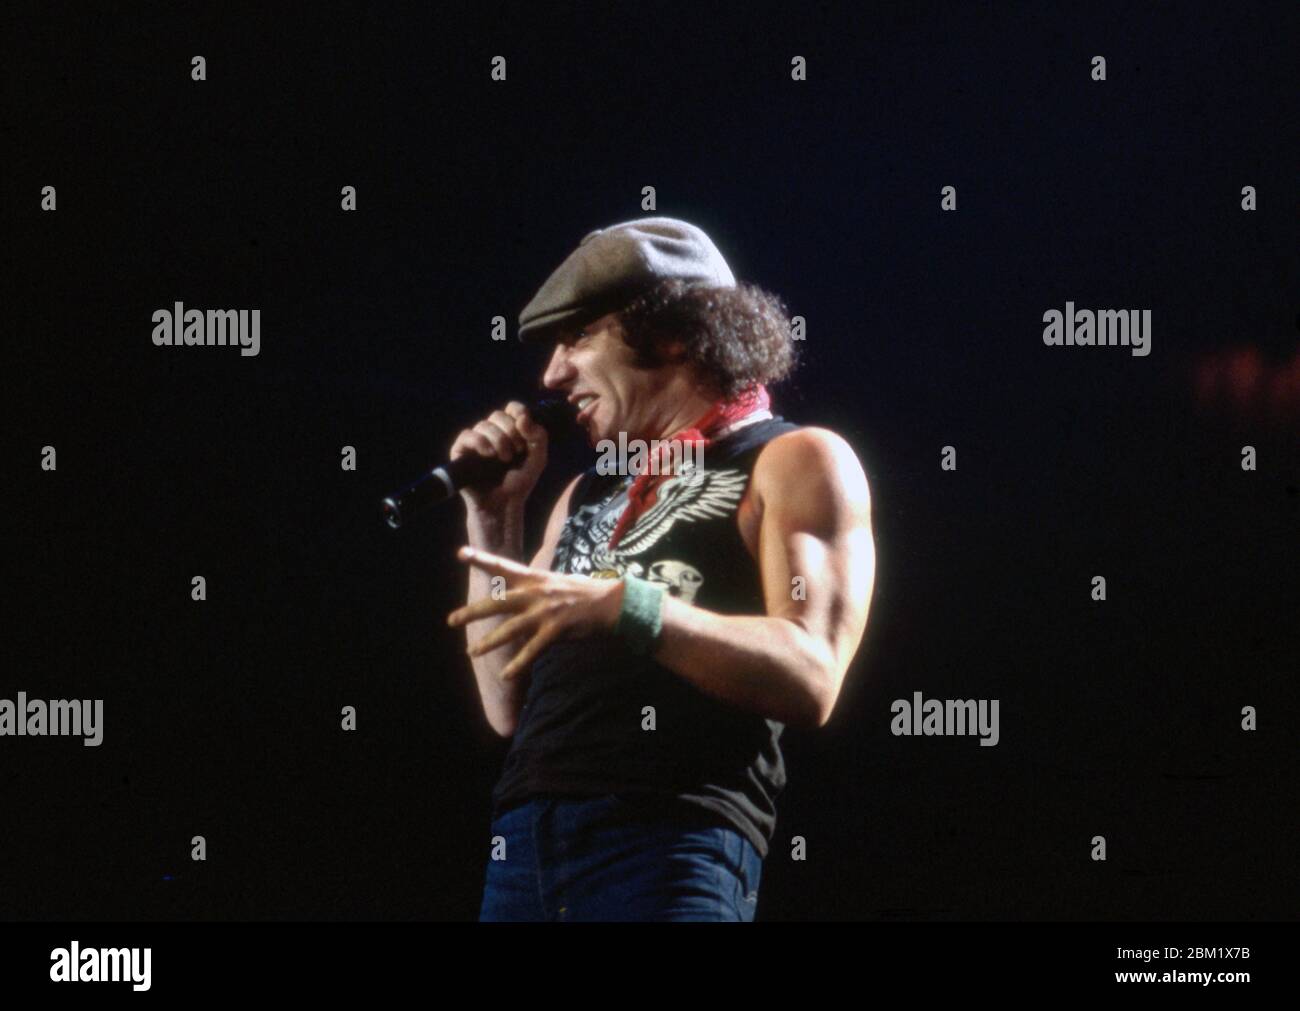 DETROIT - NOVEMBER 17: Brian Johnson, lead singer for AC/DC, performs during the Flick of the Switch/Monsters of Rock tour, on November 17, 1983, in Detroit, Michigan. (Photo by Ross Marino/Rock Negatives) Stock Photo